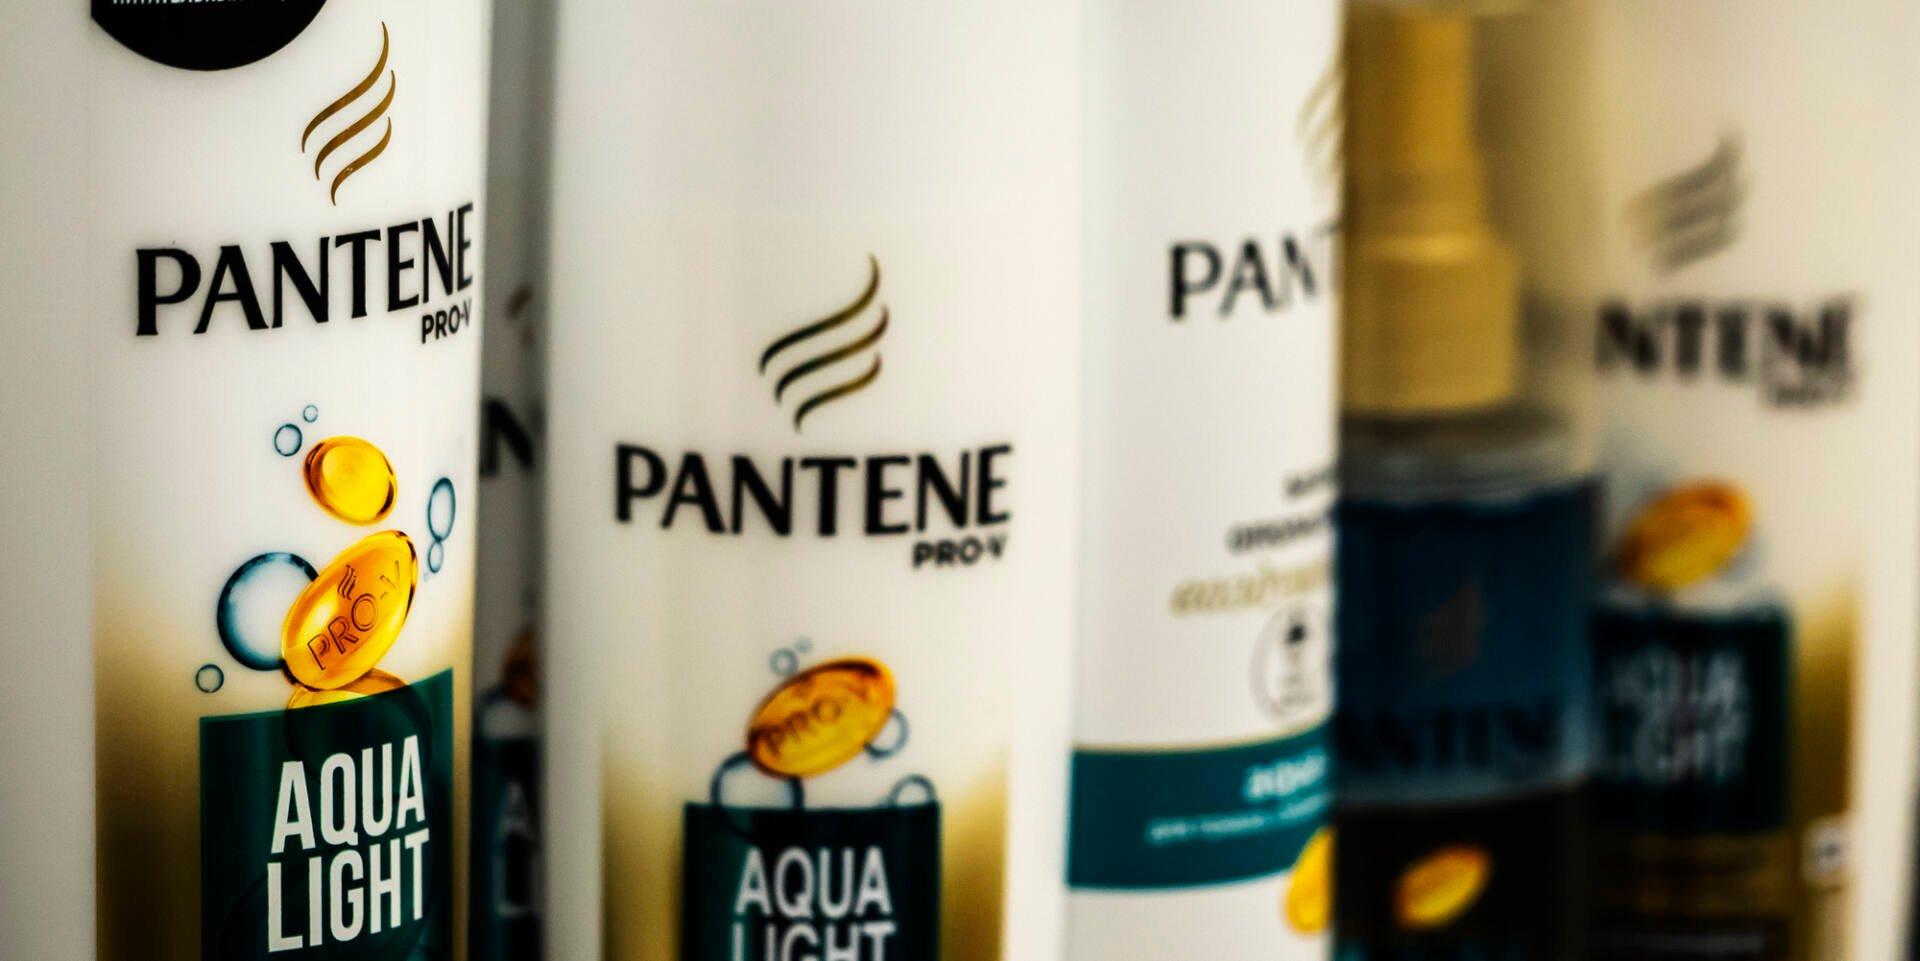 Bottles of Pantene shampoos and Pantene styling hair products